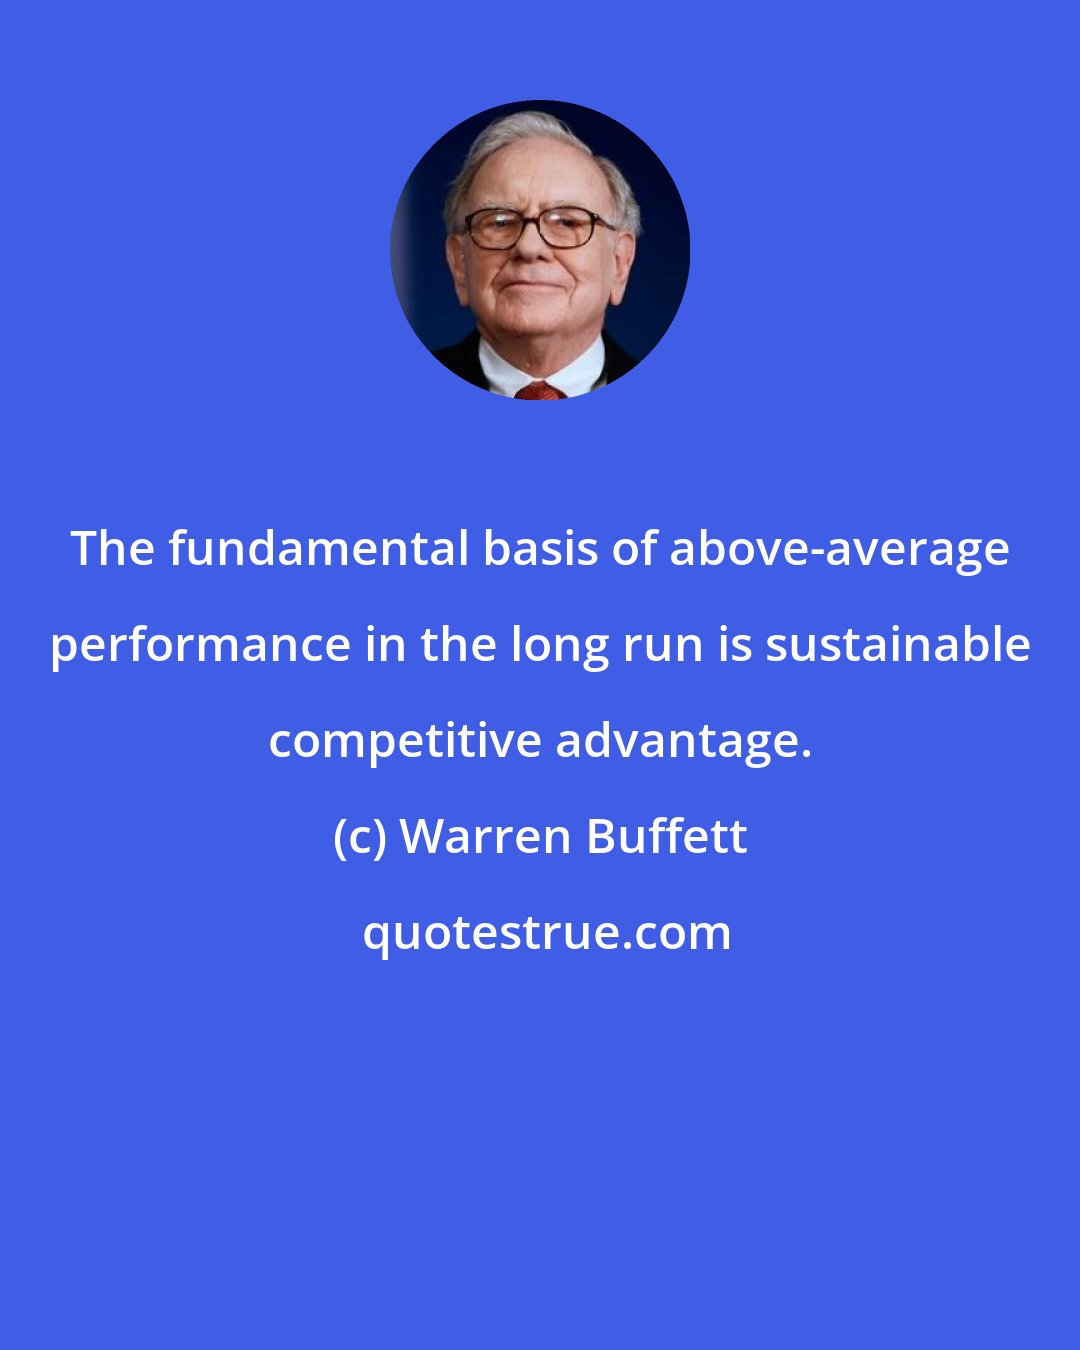 Warren Buffett: The fundamental basis of above-average performance in the long run is sustainable competitive advantage.